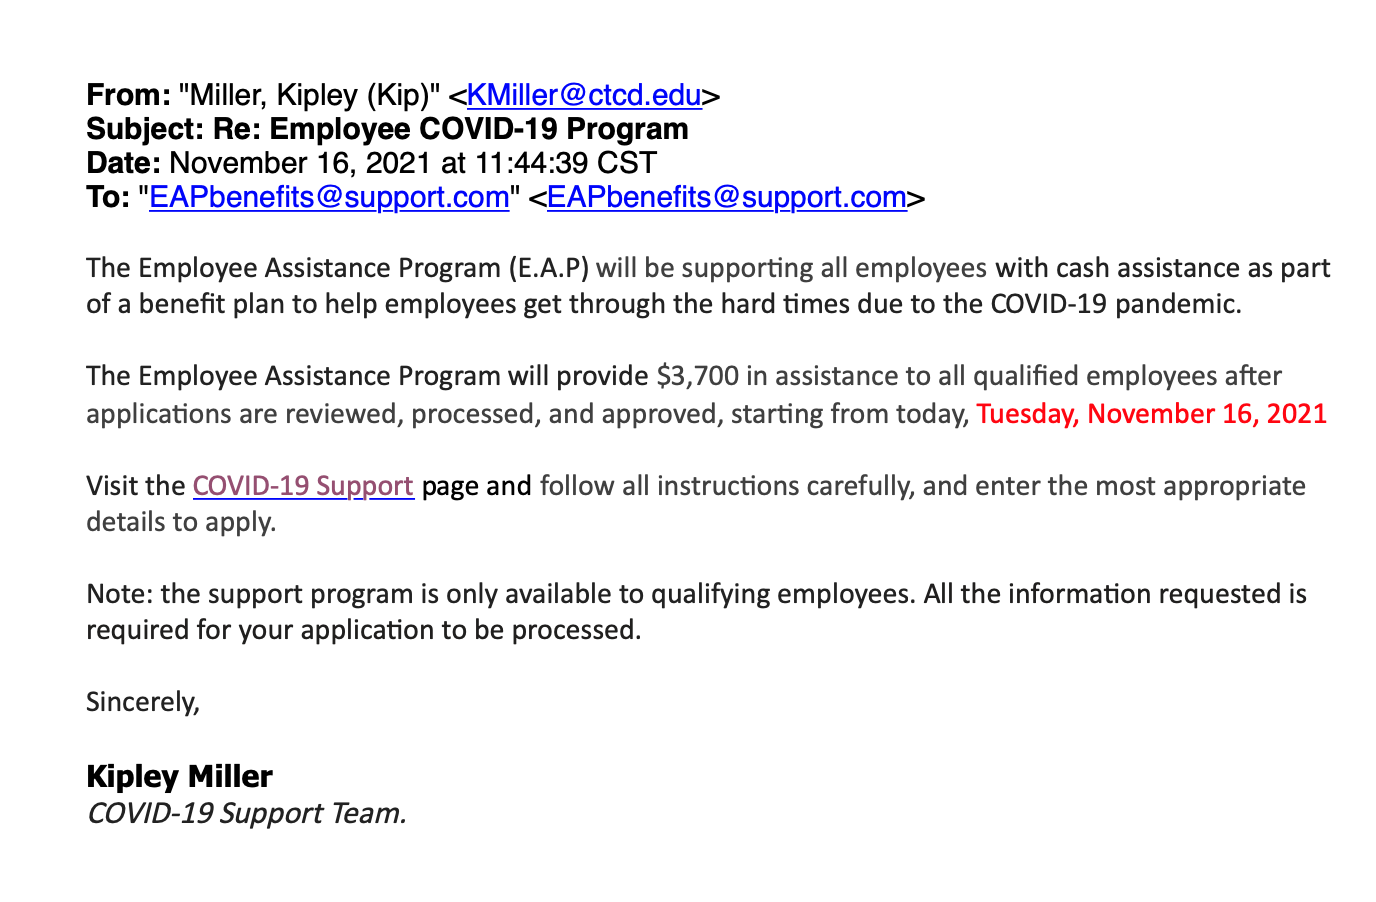 From: "Miller, Kipley (Kip)" <KMiller@ctcd.edu> Subject: Re: Employee COVID-19 Program Date: November 16, 2021 at 11:44:39 CST To: "EAPbenefits@support.com" <EAPbenefits@support.com> The Employee Assistance Program (E.A.P) will be supporting all employees with cash assistance as part of a benefit plan to help employees get through the hard times due to the COVID-19 pandemic. The Employee Assistance Program will provide $3,700 in assistance to all qualified employees after applications are reviewed, processed, and approved, starting from today, Tuesday, November 16, 2021 Visit the COVID-19 Support [link removed] page and follow all instructions carefully, and enter the most appropriate details to apply. Note: the support program is only available to qualifying employees. All the information requested is required for your application to be processed. Sincerely, Kipley Miller COVID-19 Support Team.